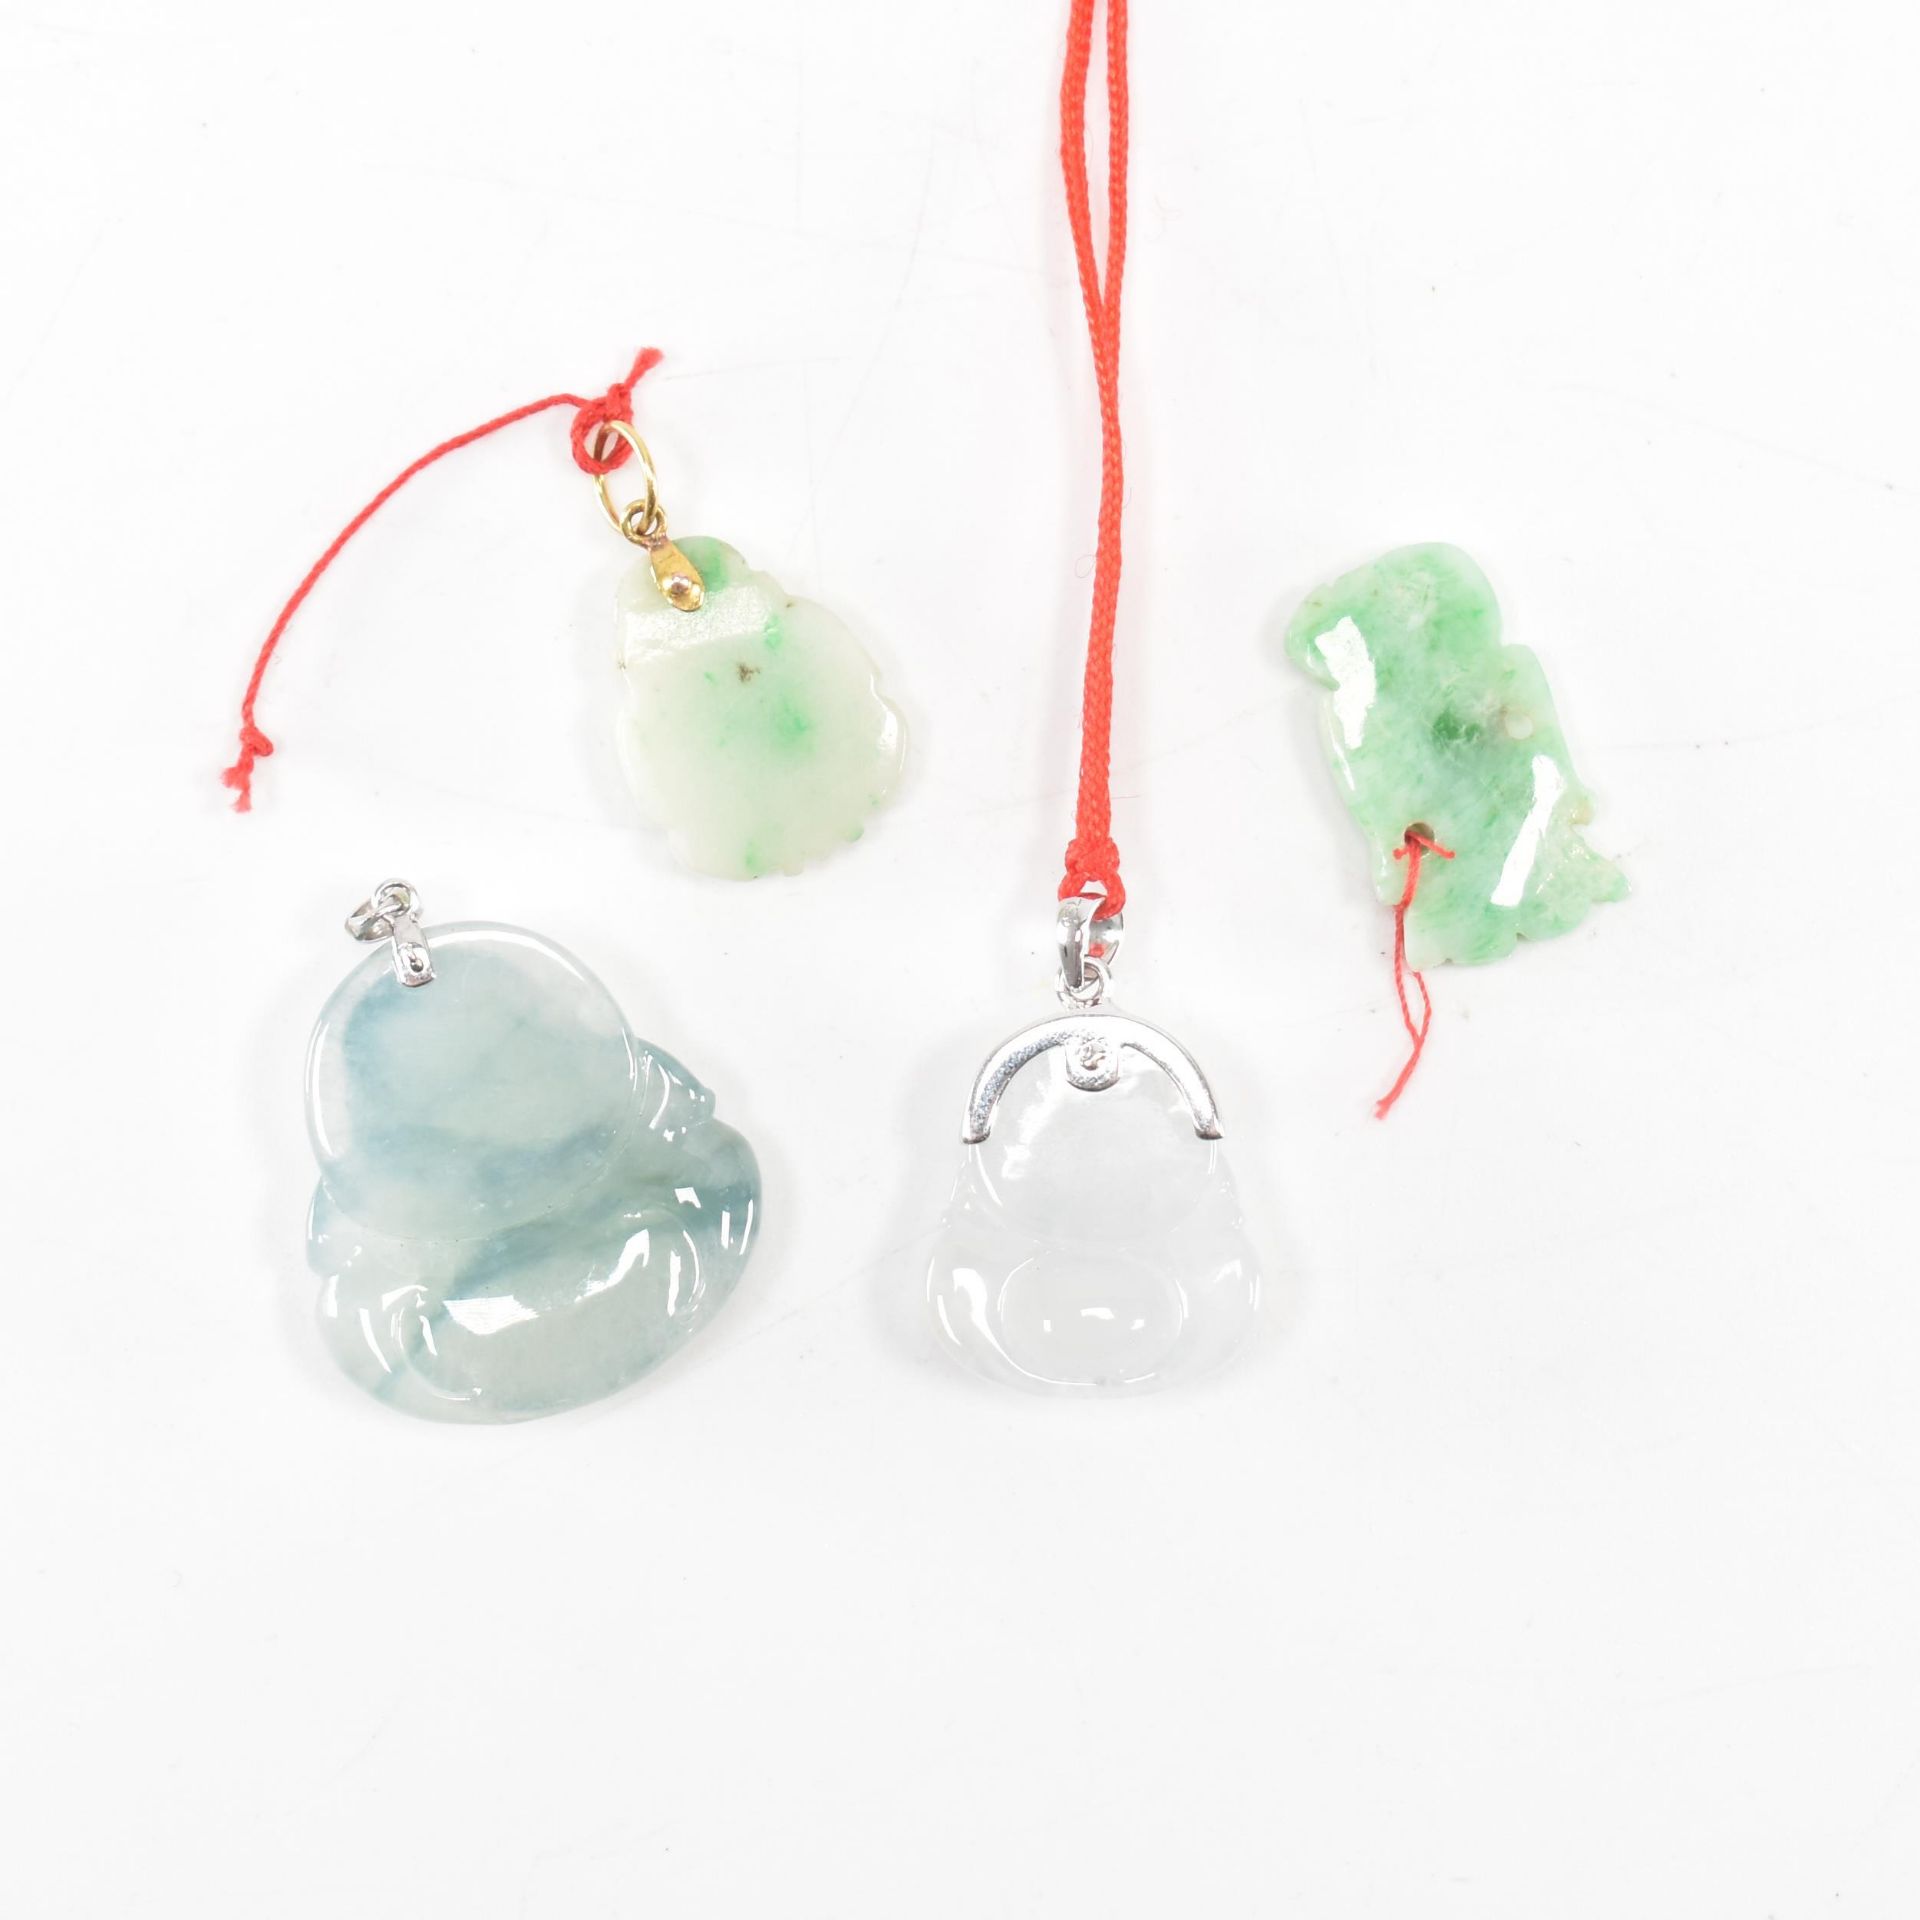 COLLECTION OF ASSORTED CARVED JADE NECKLACE PENDANTS - Image 2 of 3